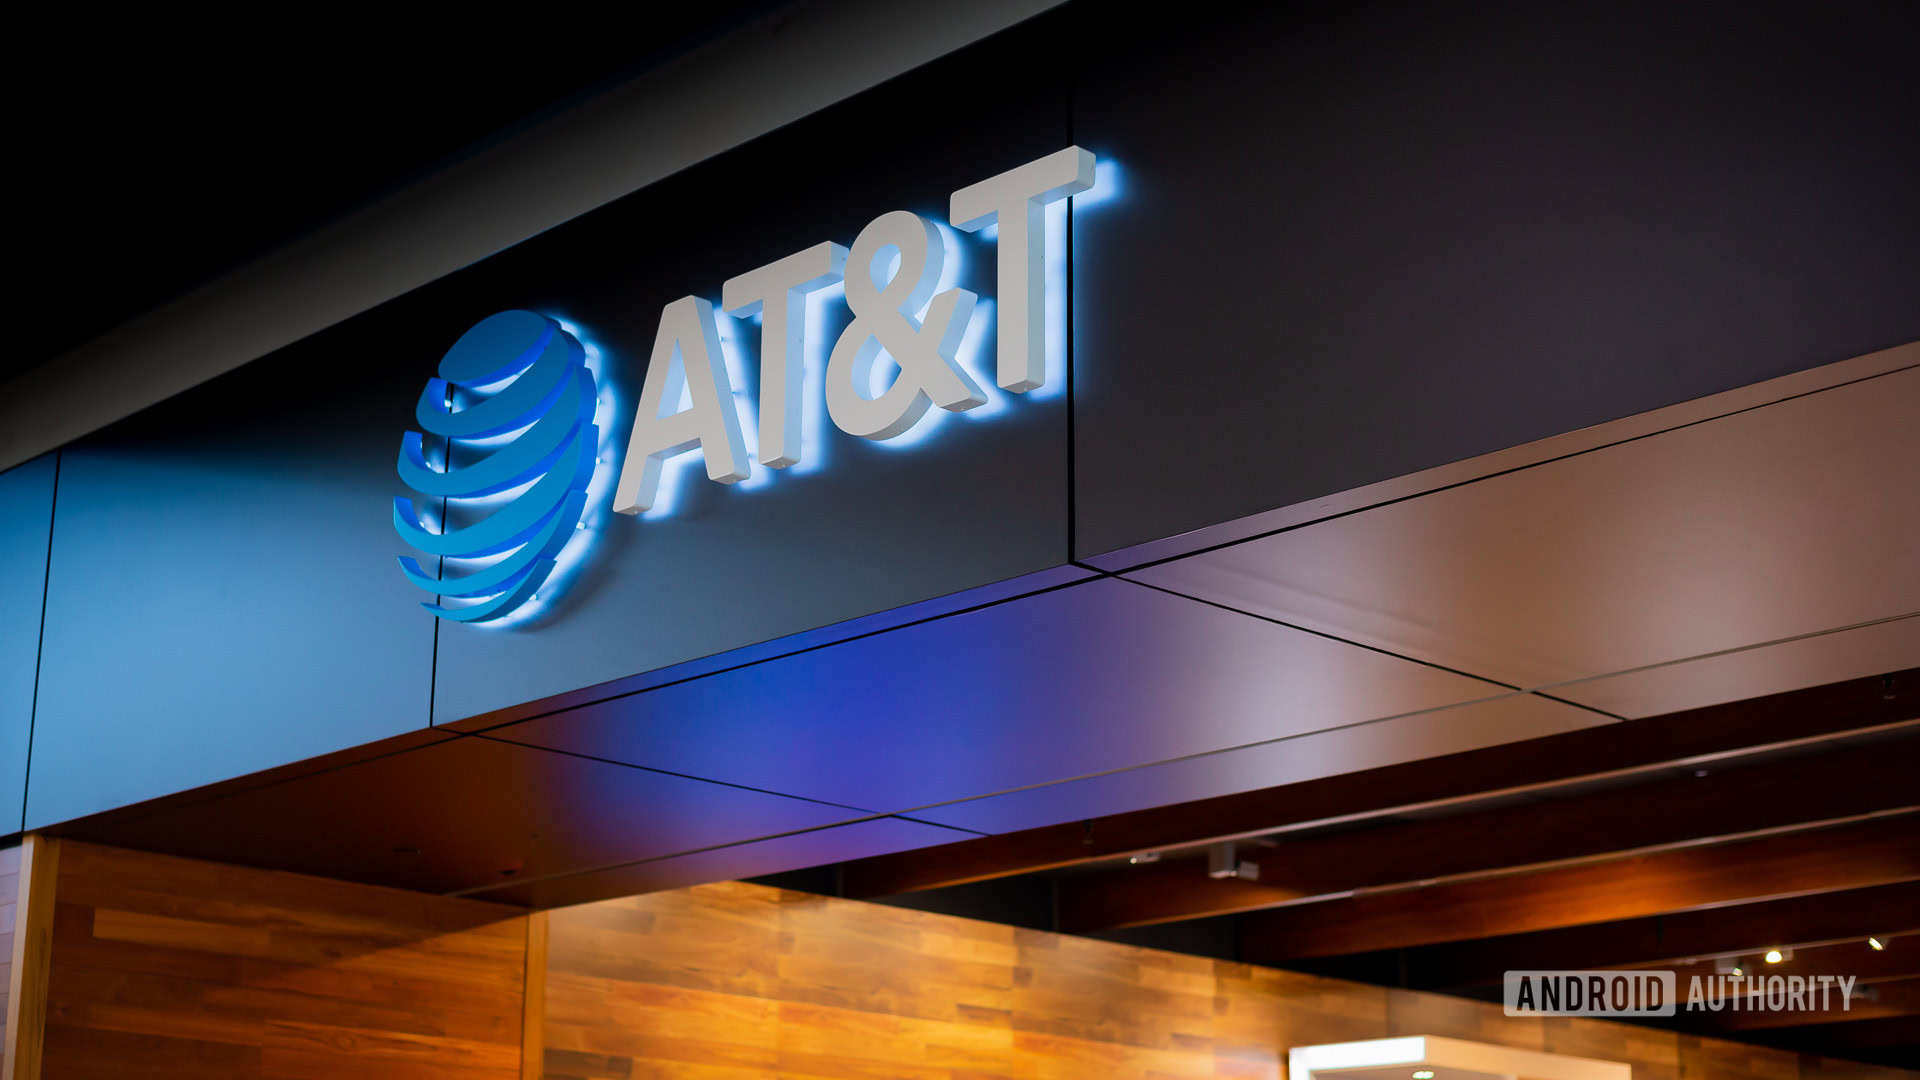 How to unlock an AT&T phone yourself